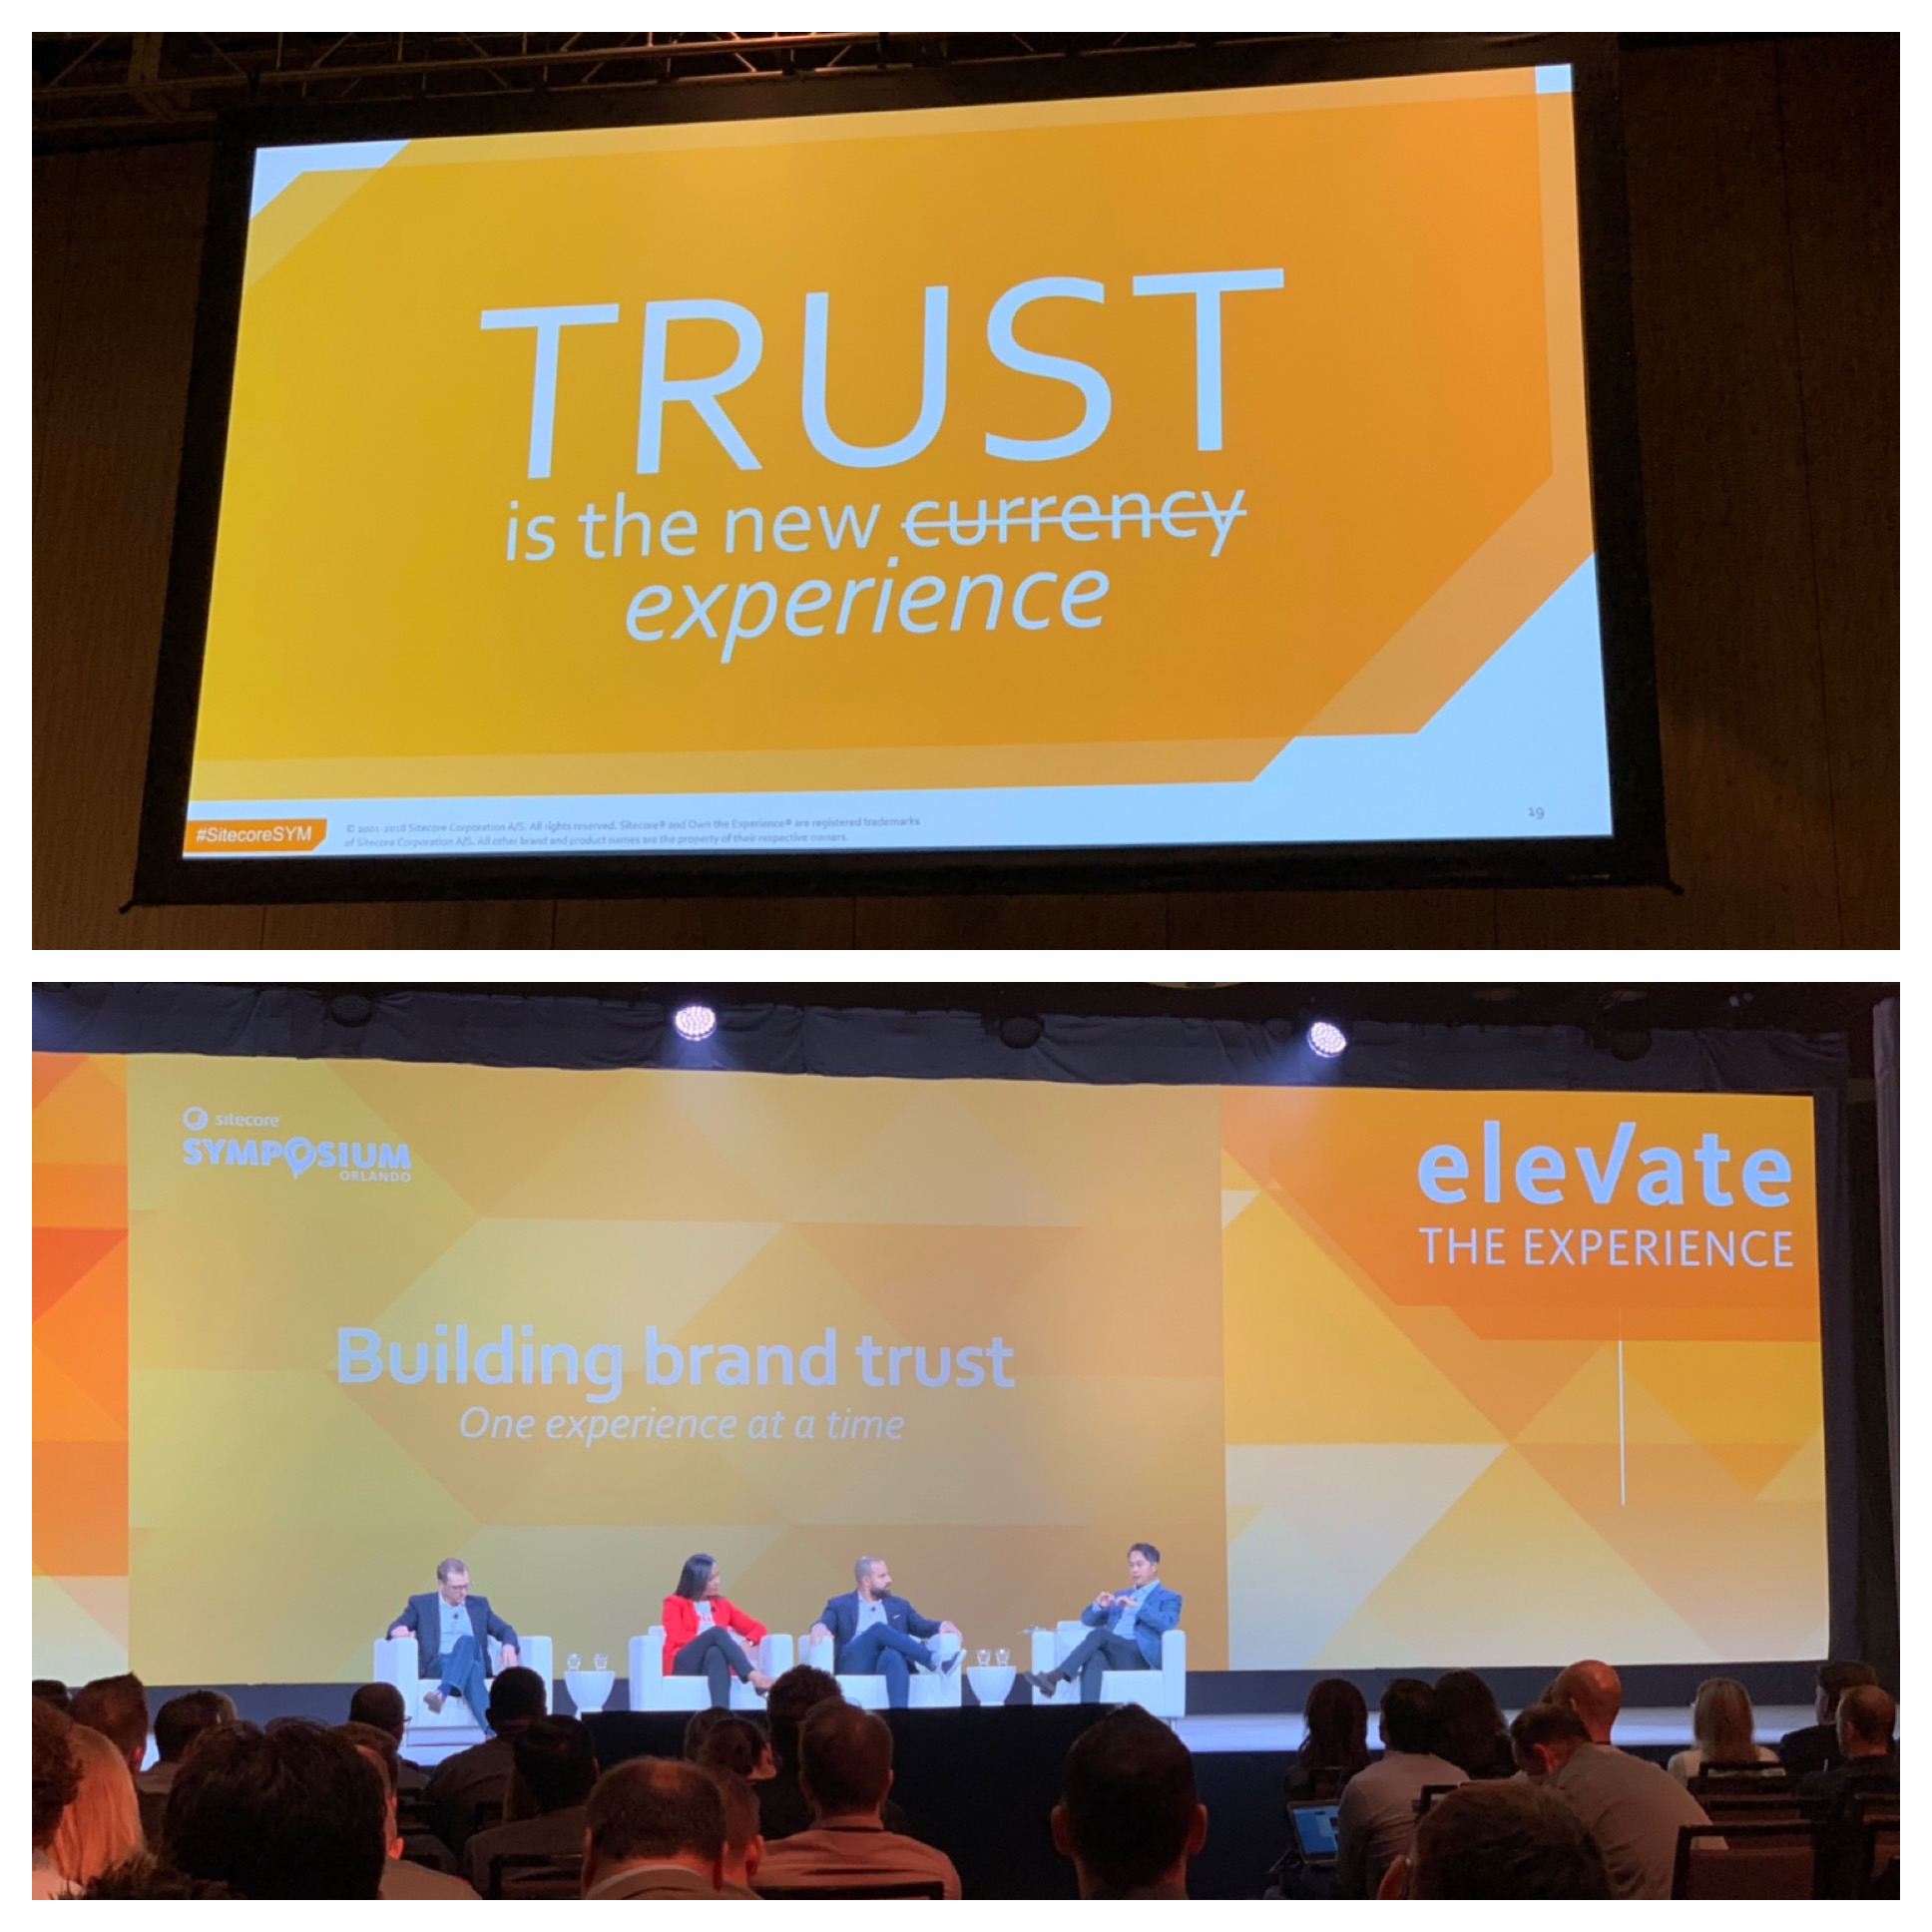 Trust is the new experience